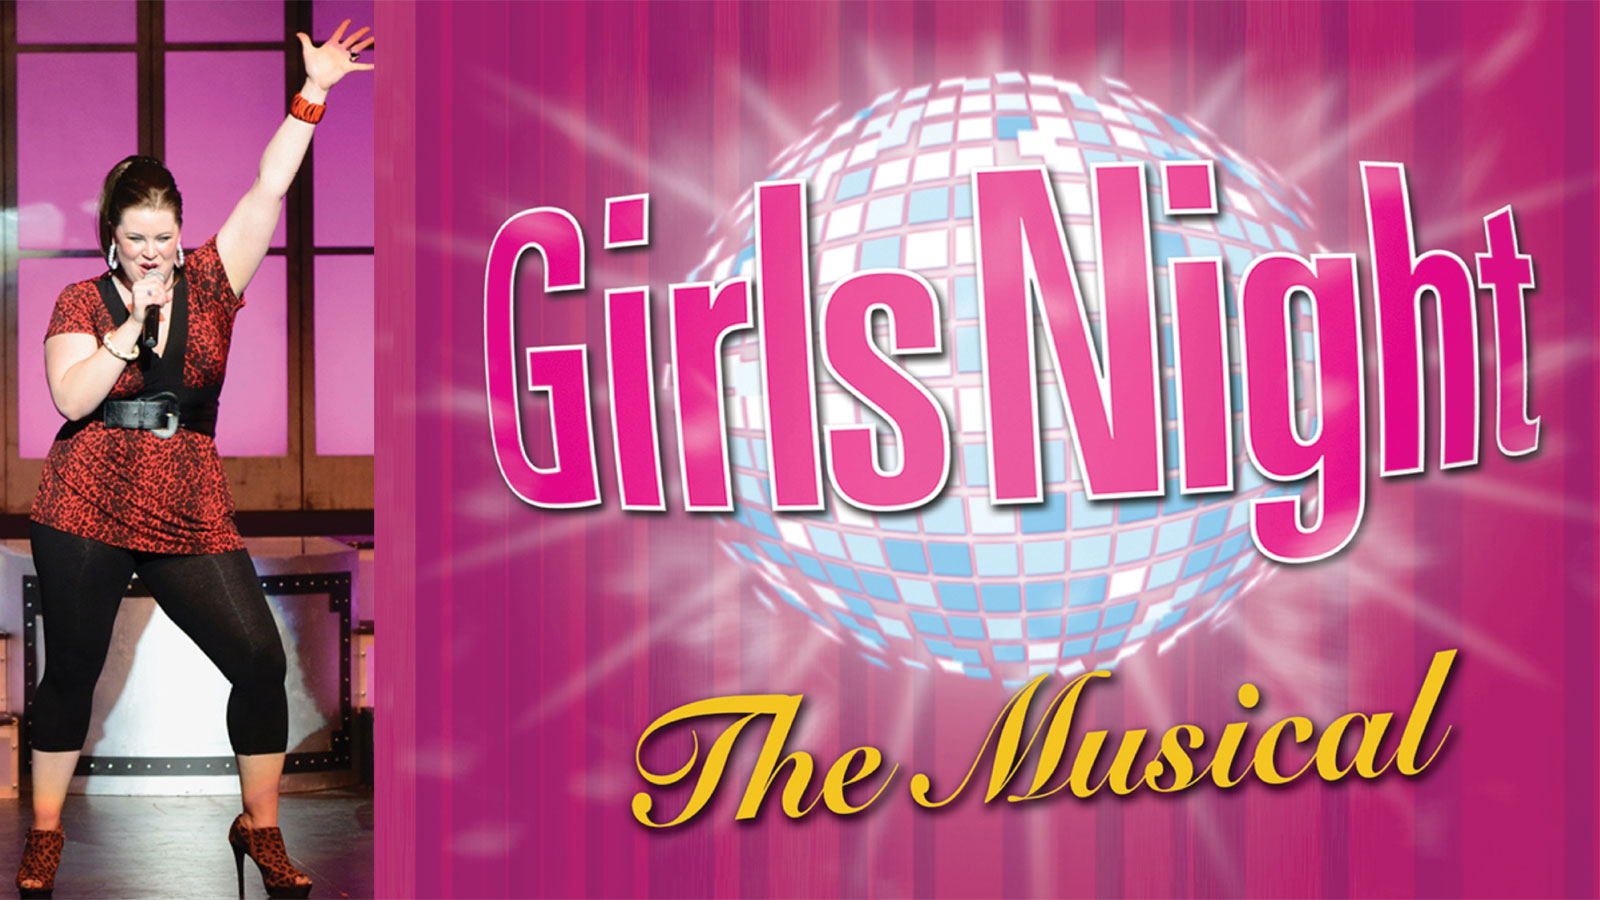 Girls Night: The Musical text beside a woman dancing and singing